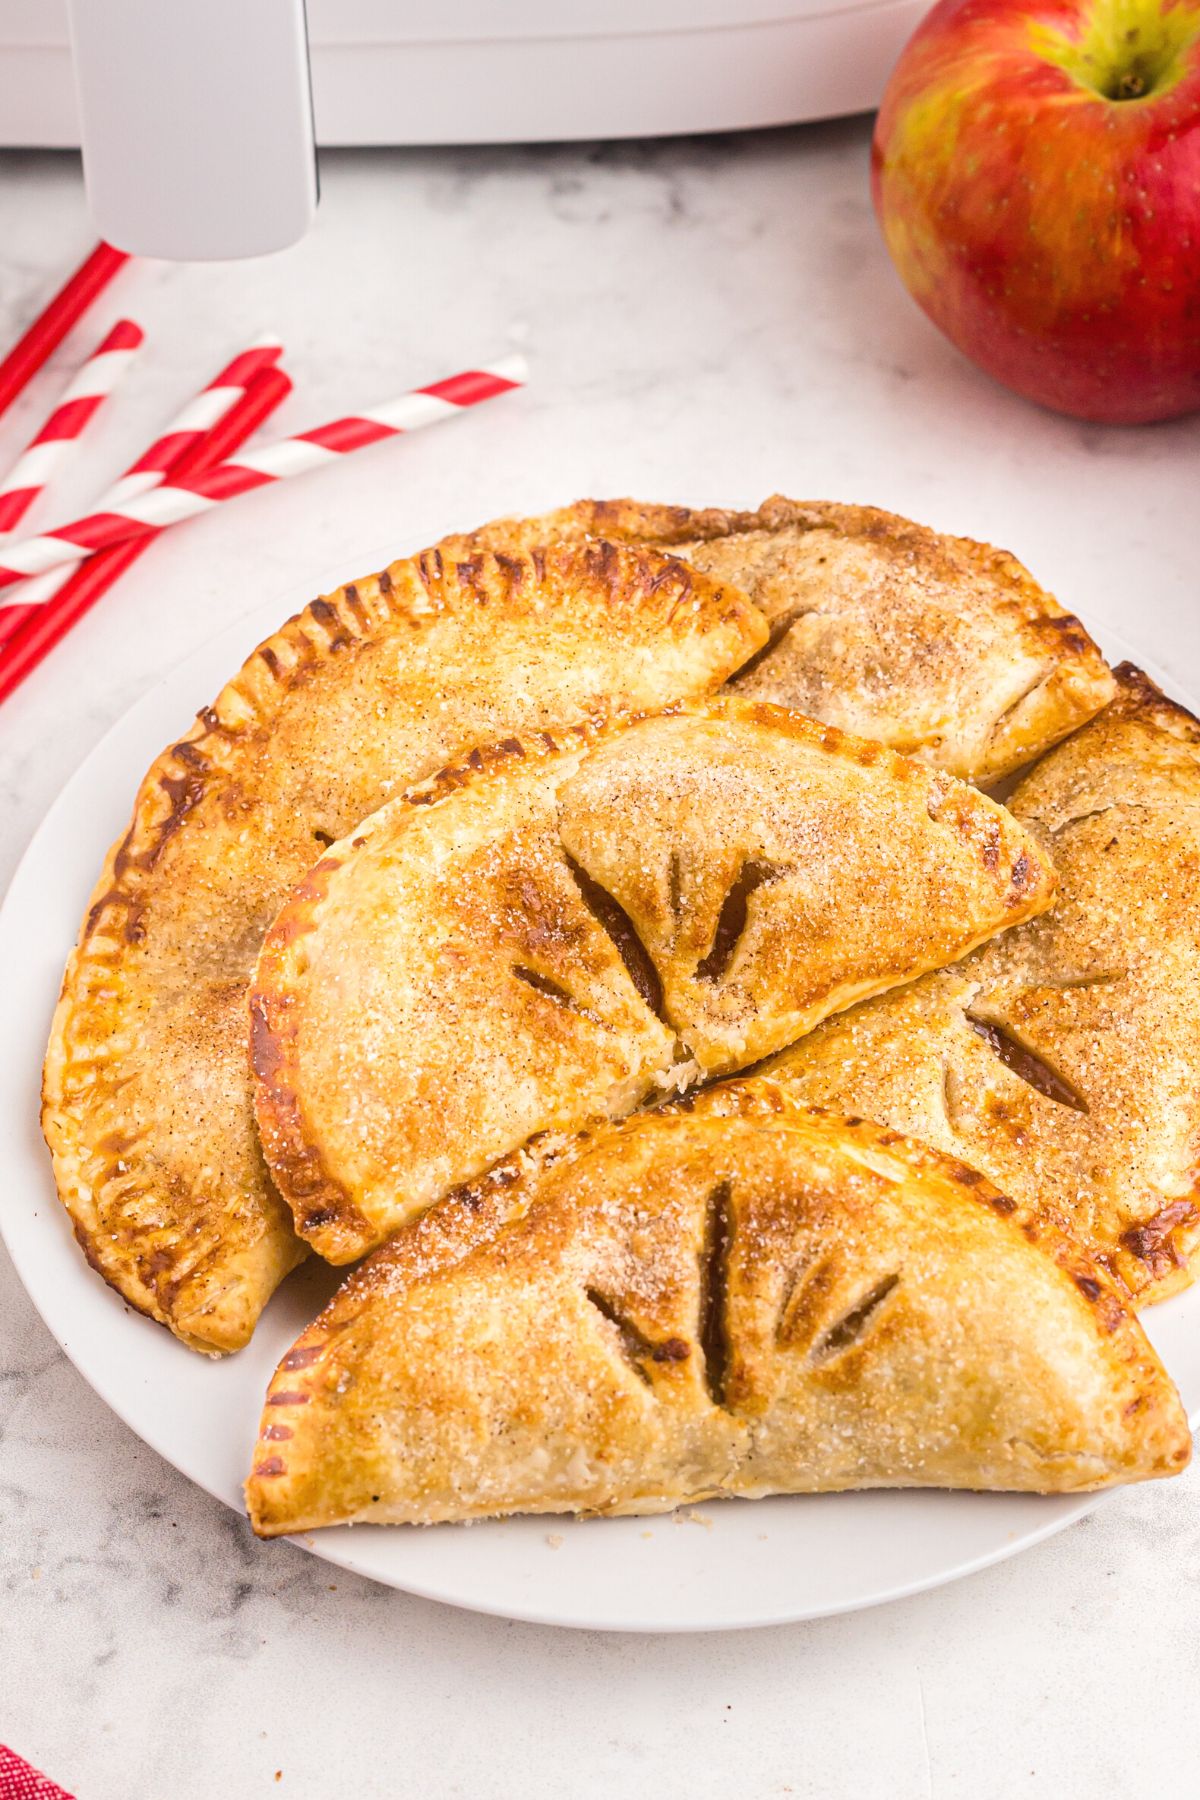 Apple hand pies on a white plate with red and white straws and an apple on the table off to the back of the plate.